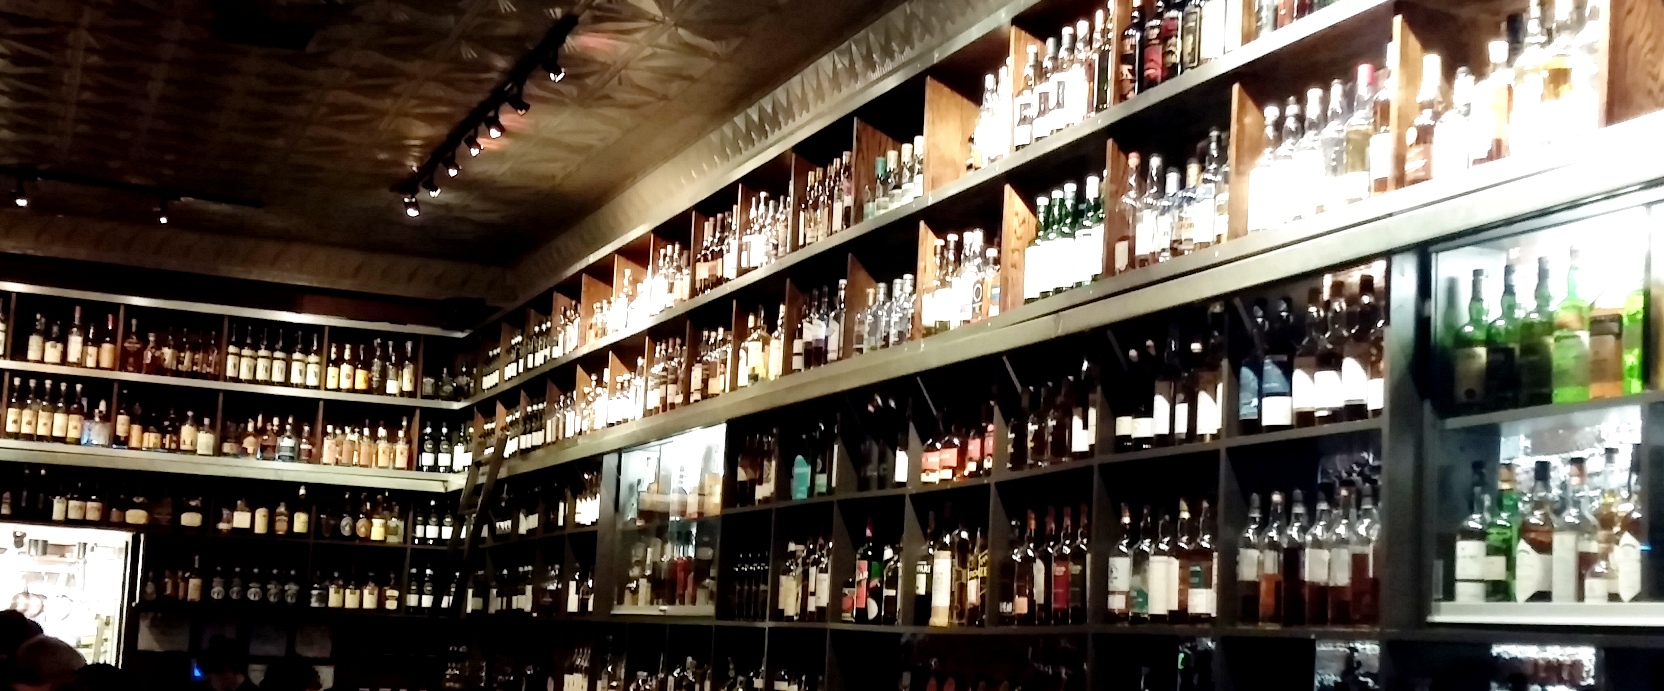 DC Whiskey & Wine News: Glendalough Whiskey & Truvee Wine; New Openings; Special Events